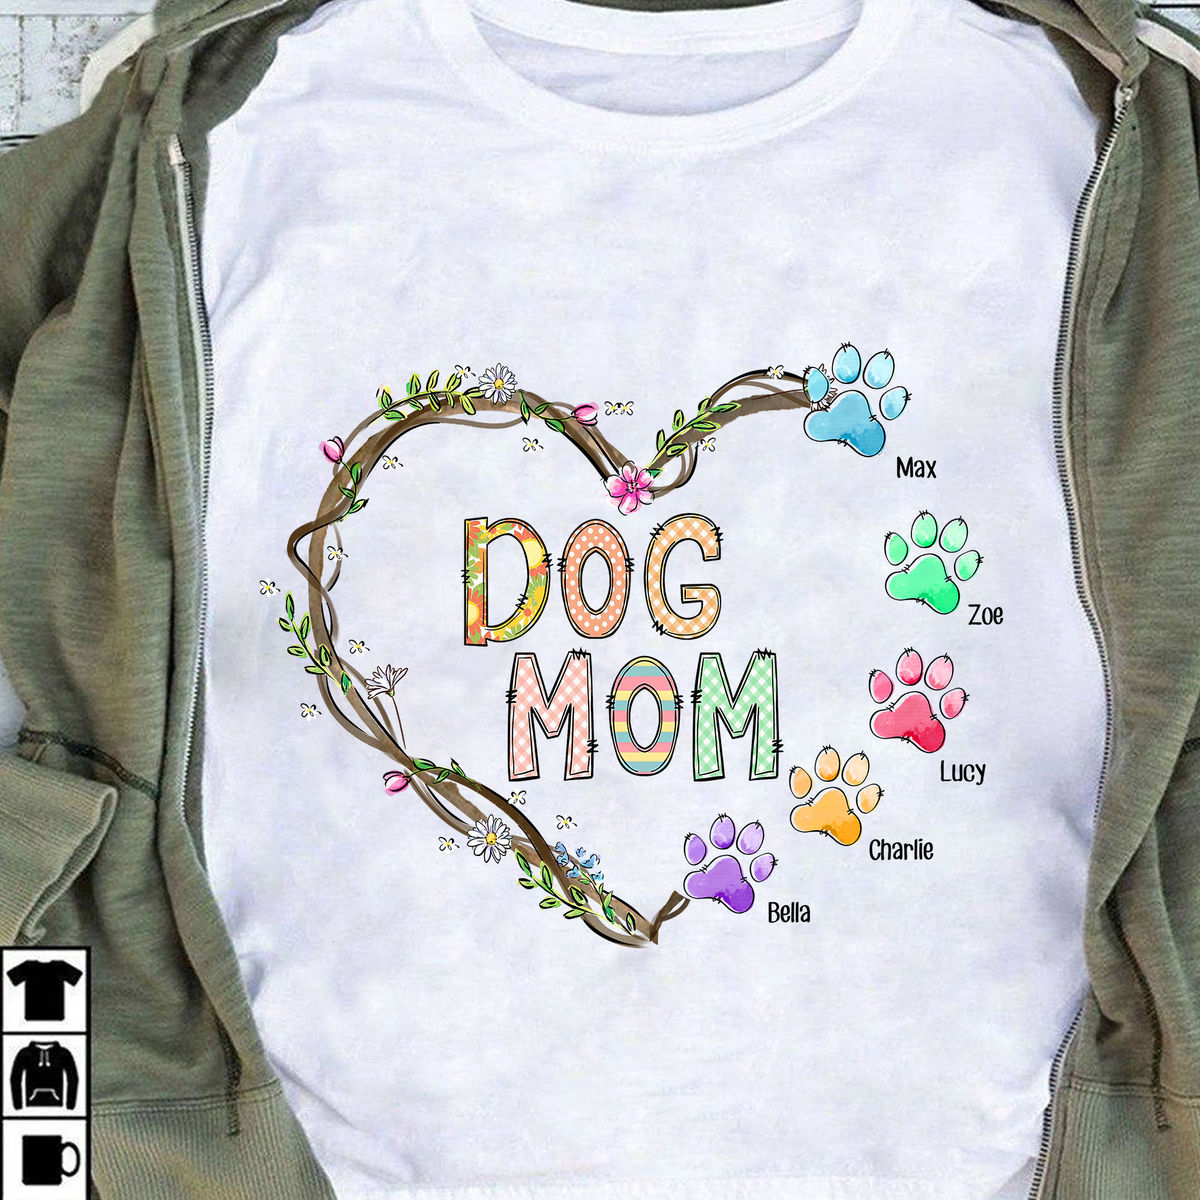 Dog mom - Gifts For Mother, Mother's Day Gifts, Birthday Gifts For Mom